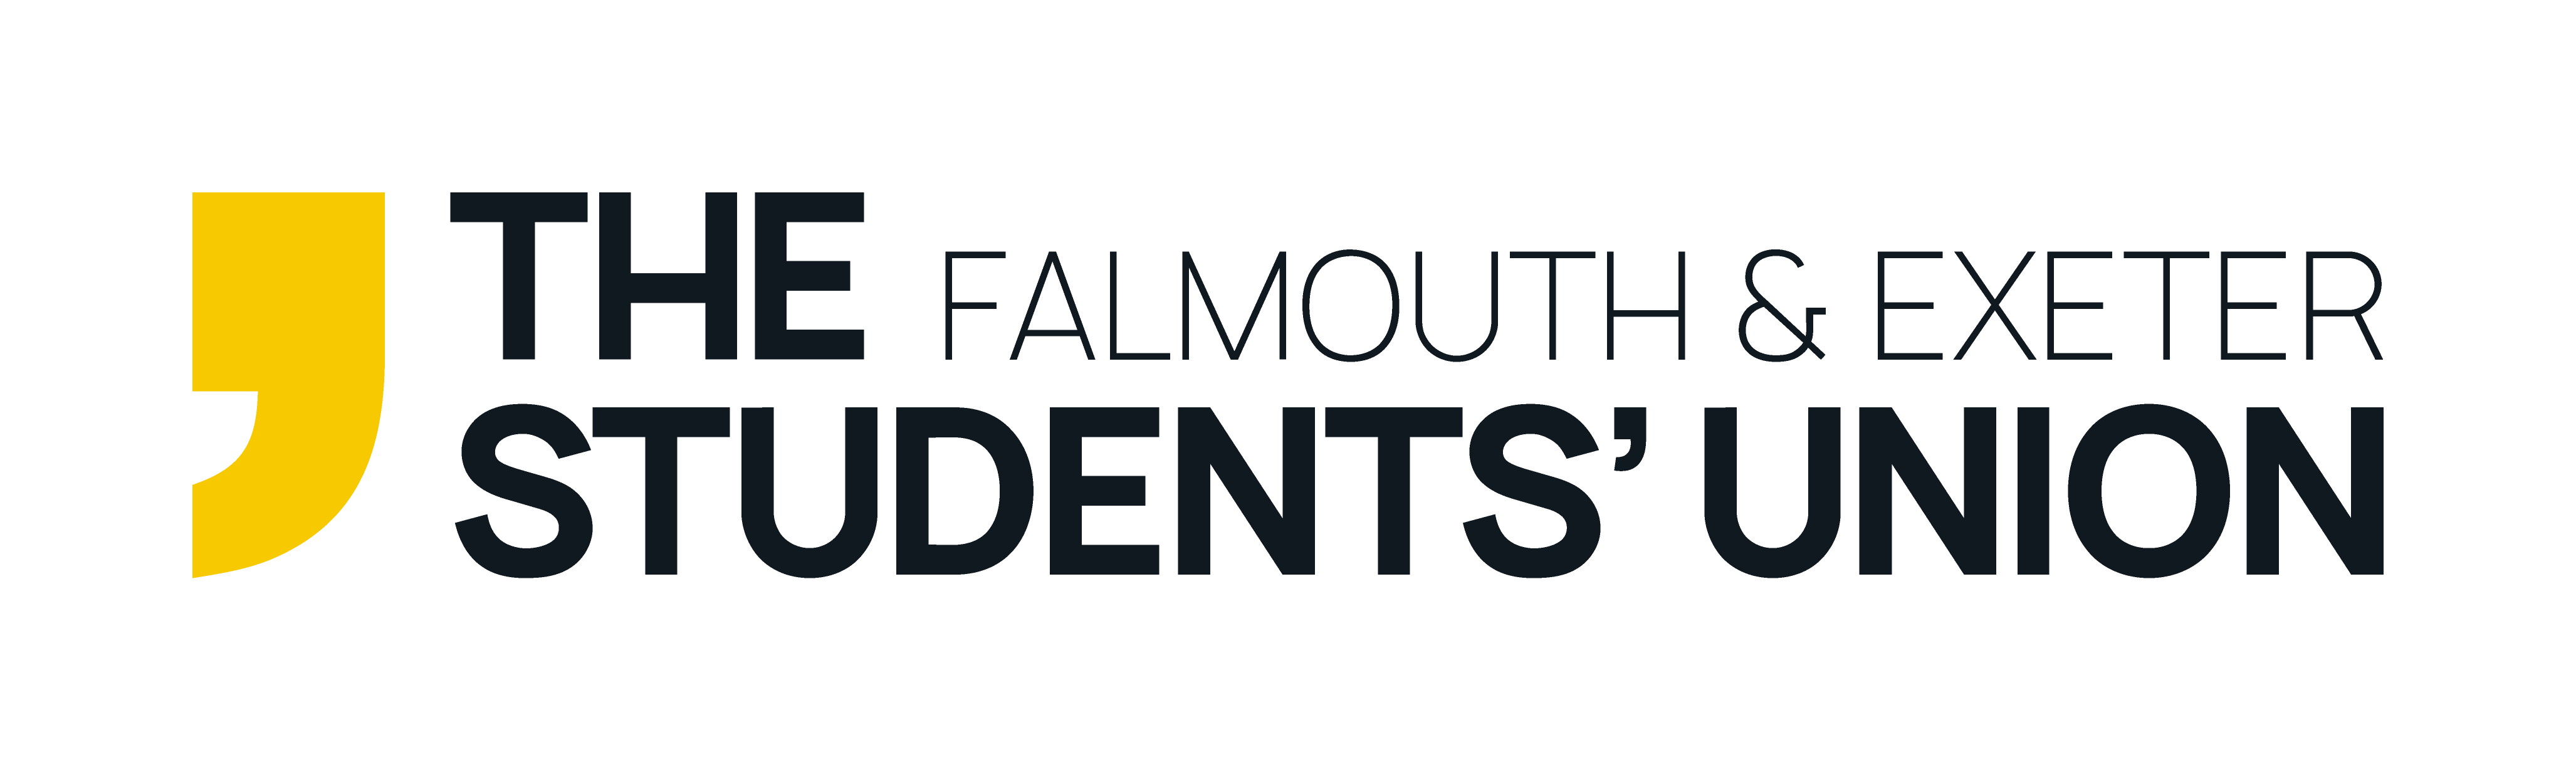 The Falmouth & Exeter Students' Union logo colour RGB png